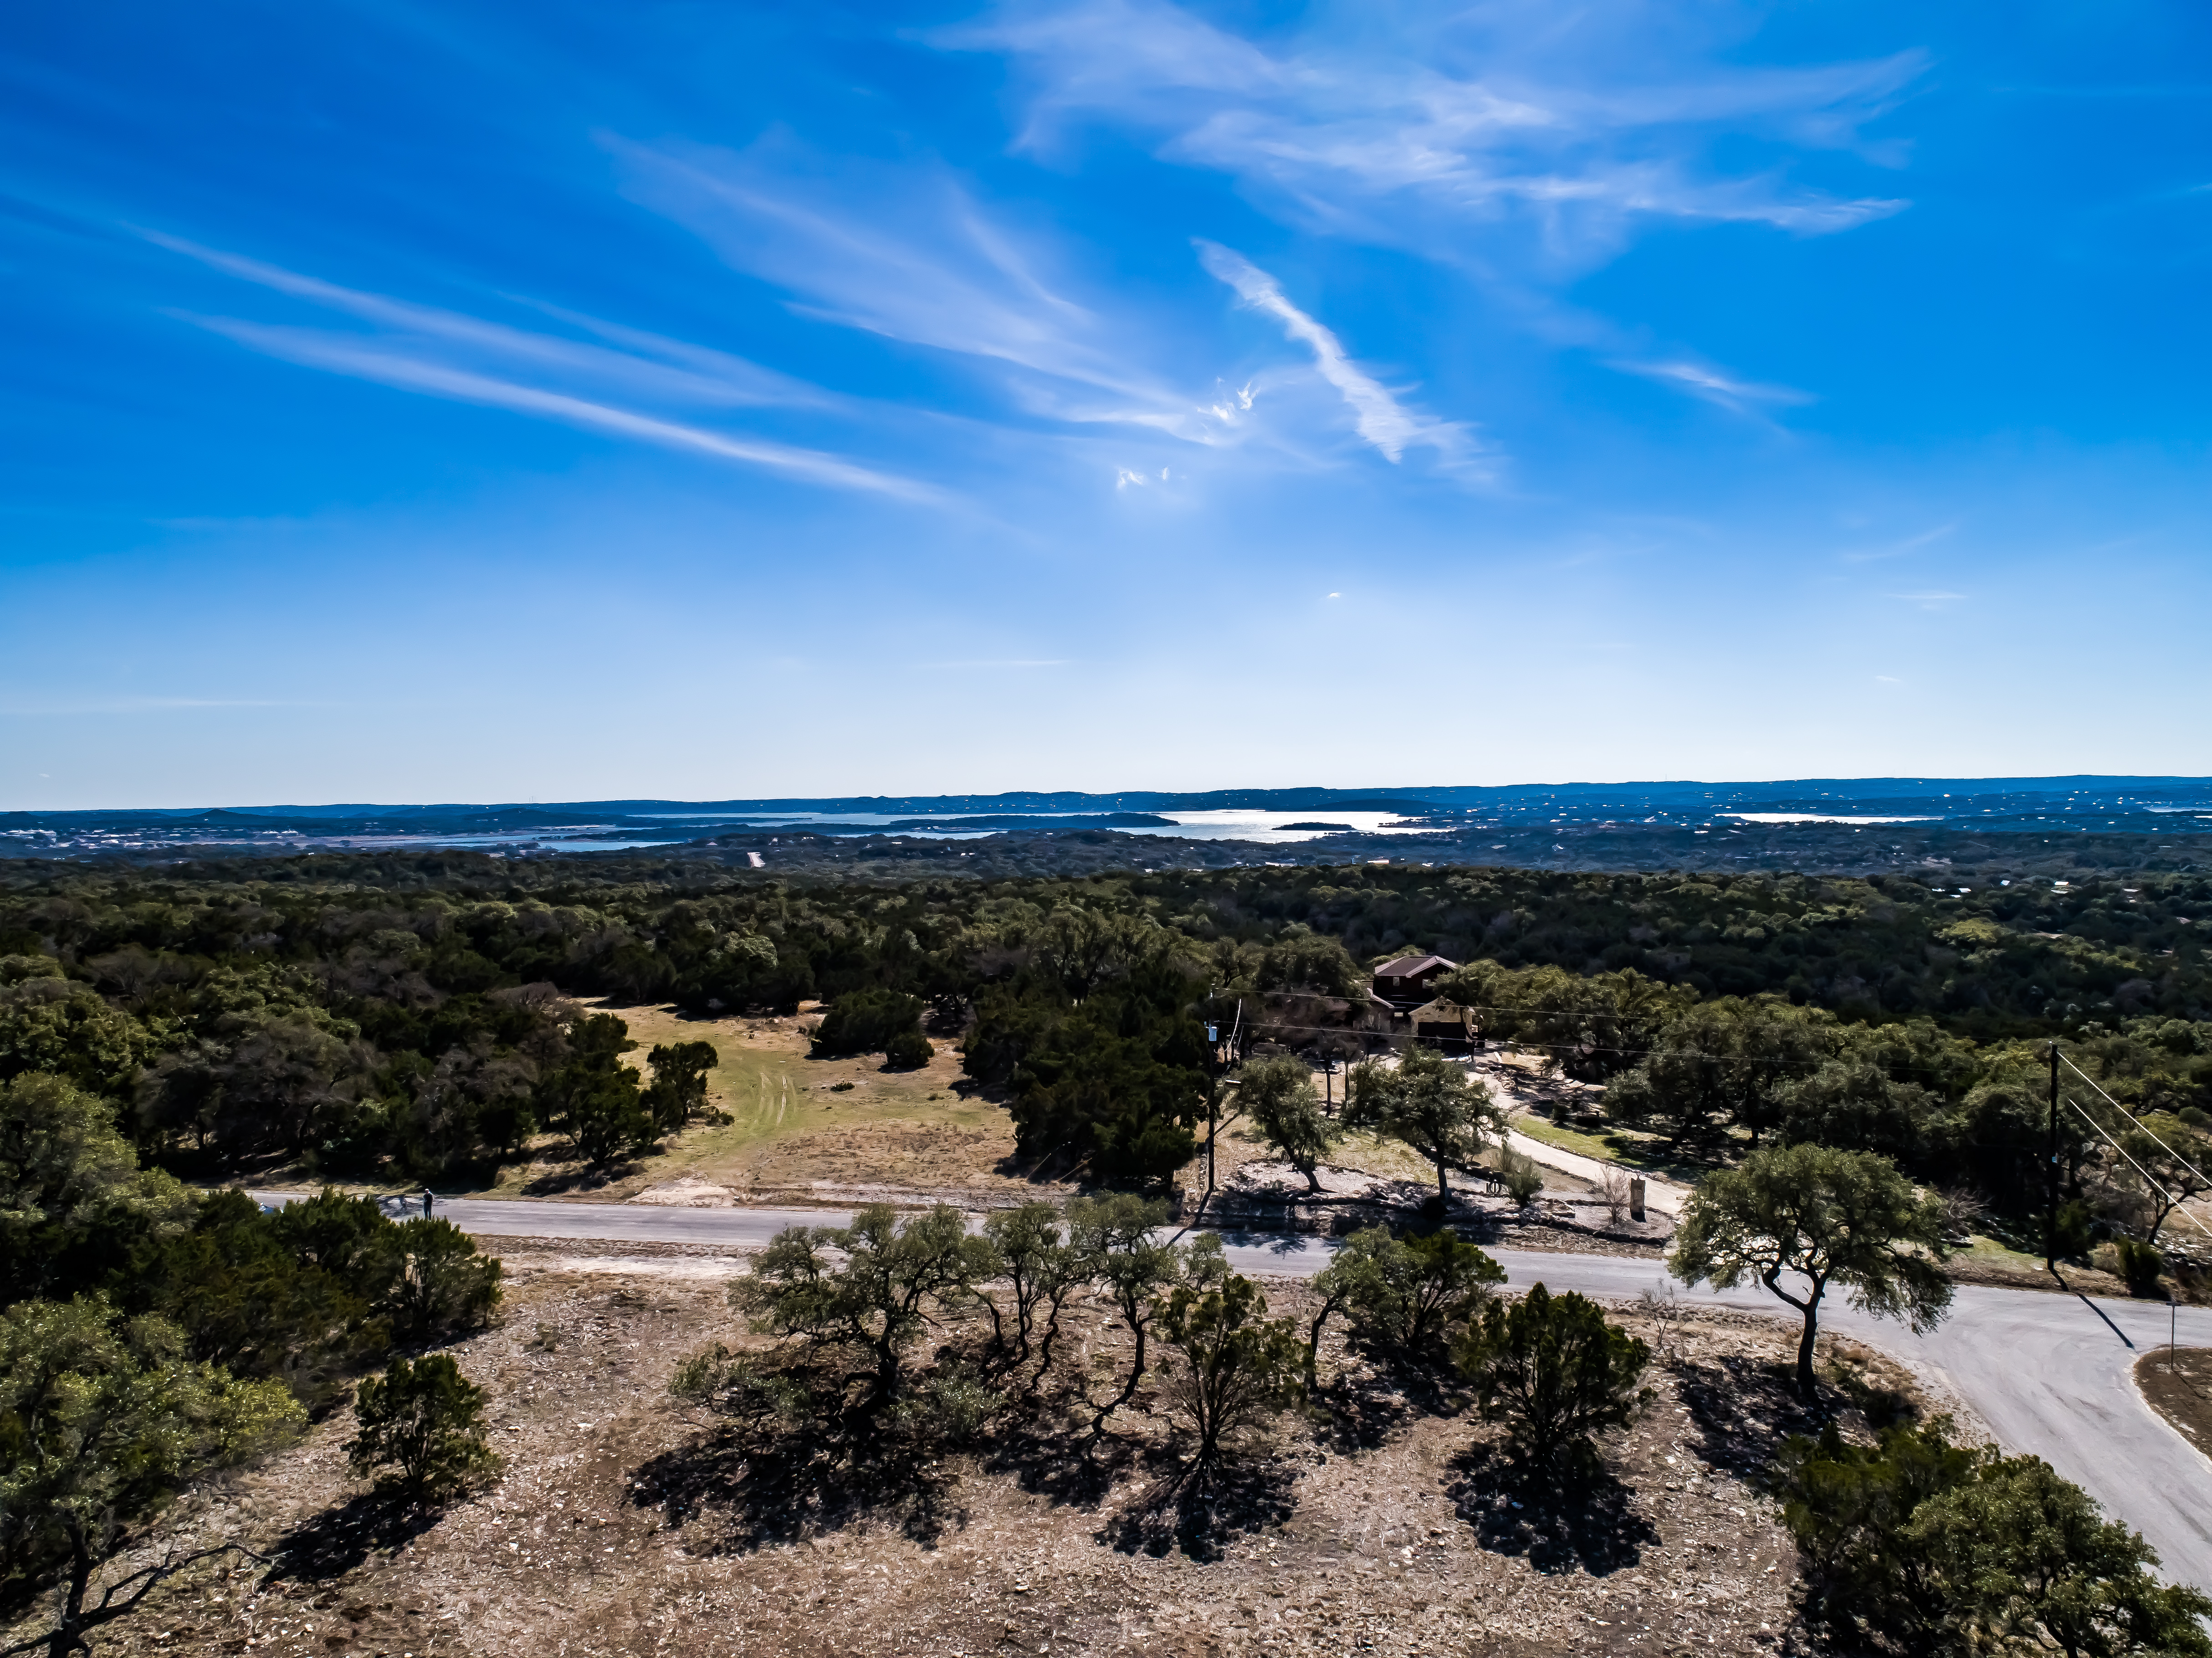 227 Flanders, Fischer, TX - 1 acre for sale near Canyon Lake